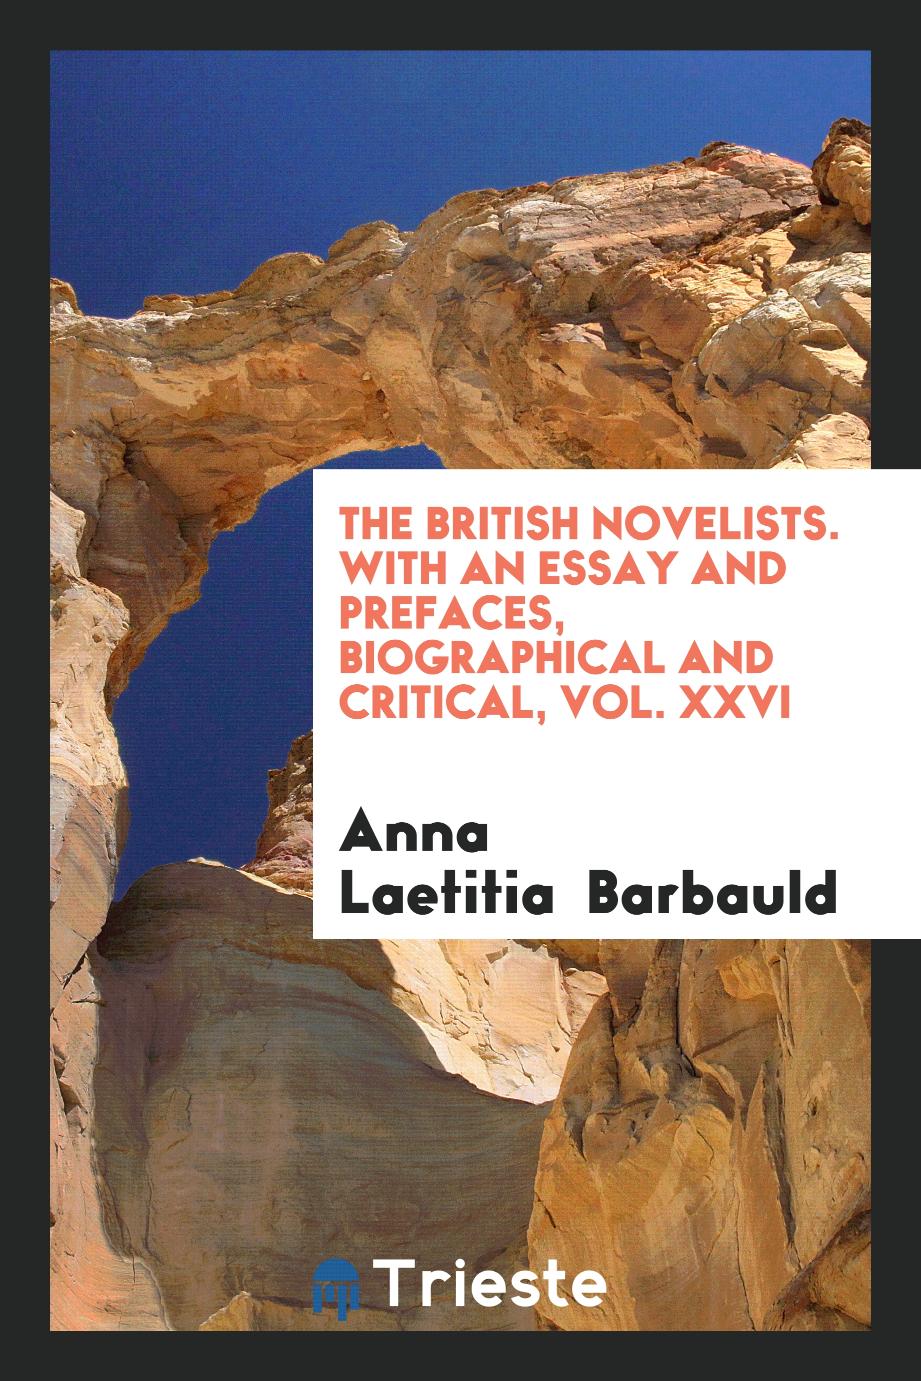 The British novelists. With an essay and prefaces, biographical and critical, Vol. XXVI